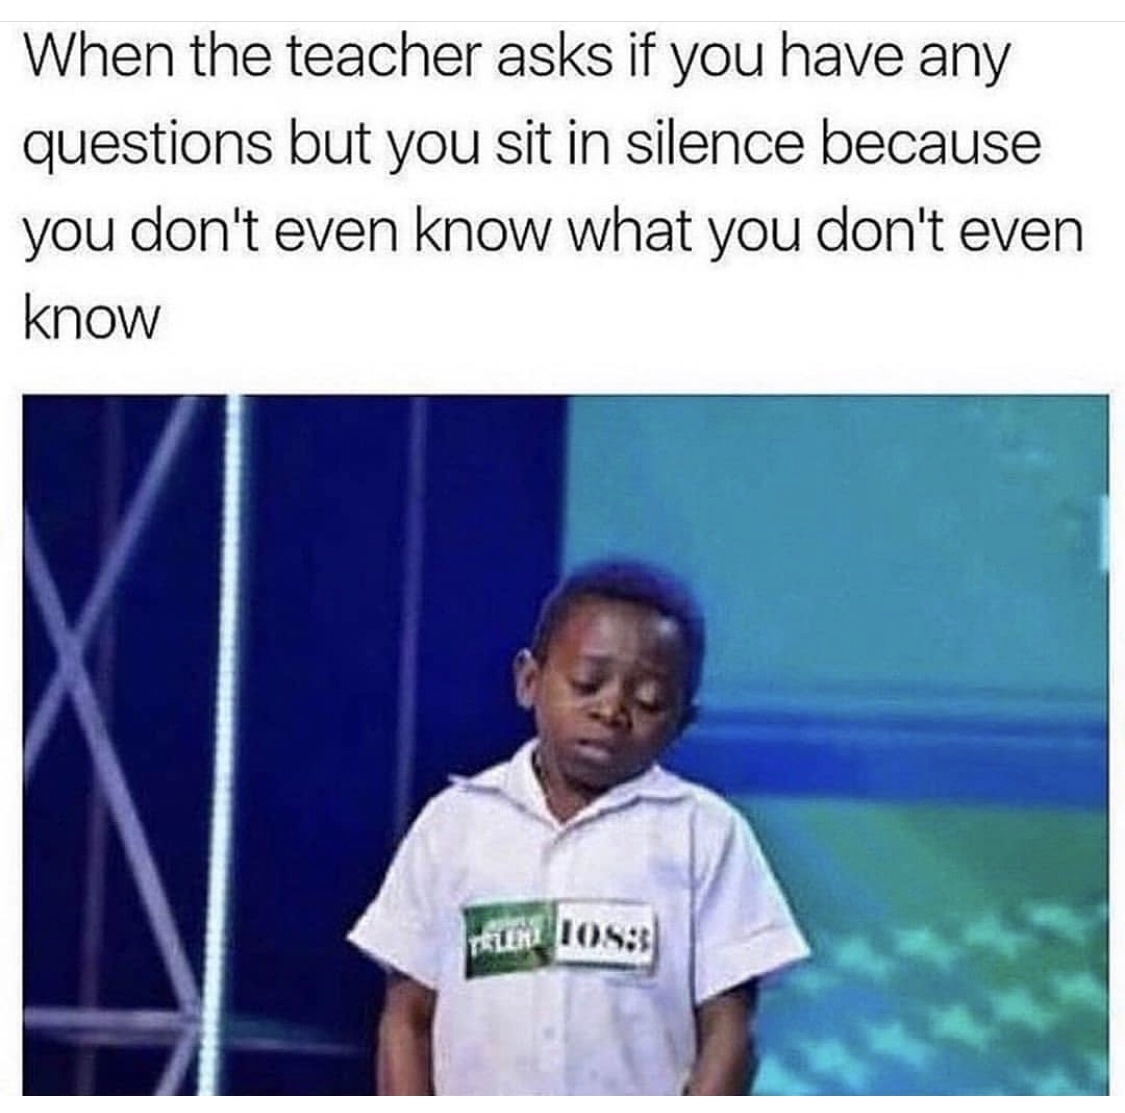 you don t even know what you don t know meme - When the teacher asks if you have any questions but you sit in silence because you don't even know what you don't even know